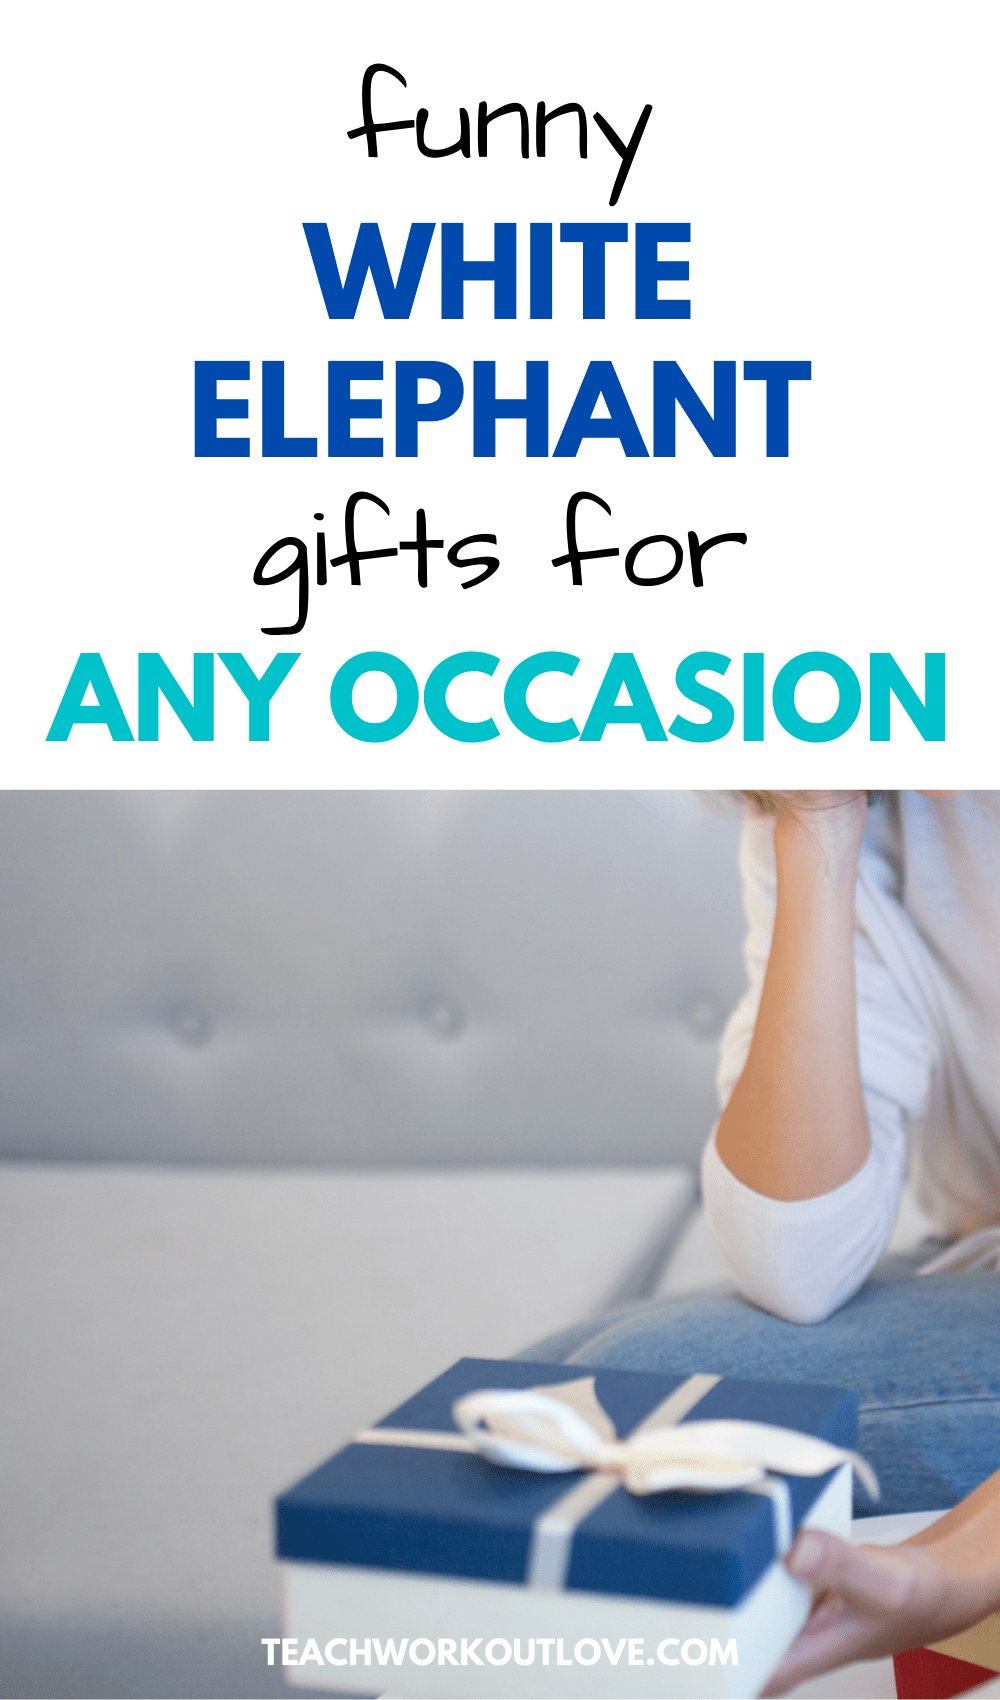 White Elephant gifts are a favorite exchange people do at parties! But what are some funny ideas that you can bring to the table? We've got you covered!